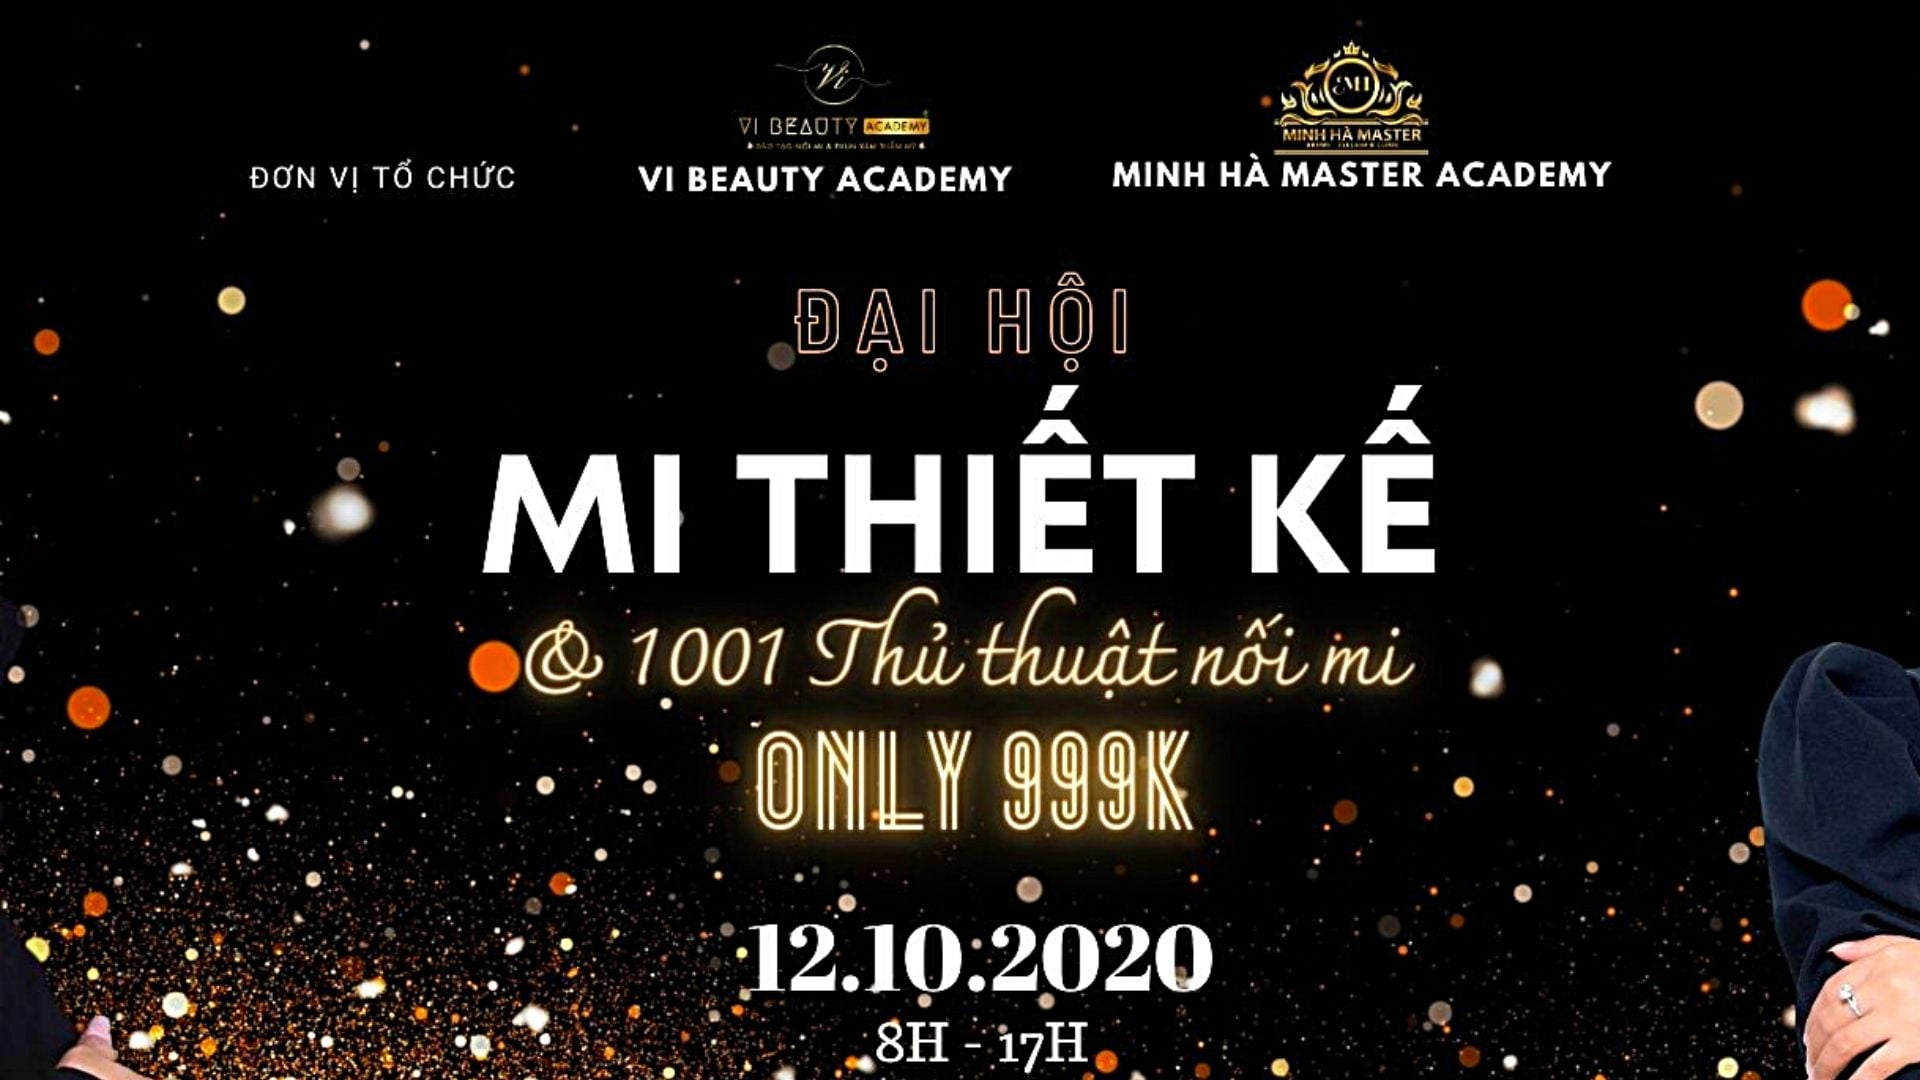 You are currently viewing [Free] Hội thảo Mi Thiết Kế & 1001 thủ thuật